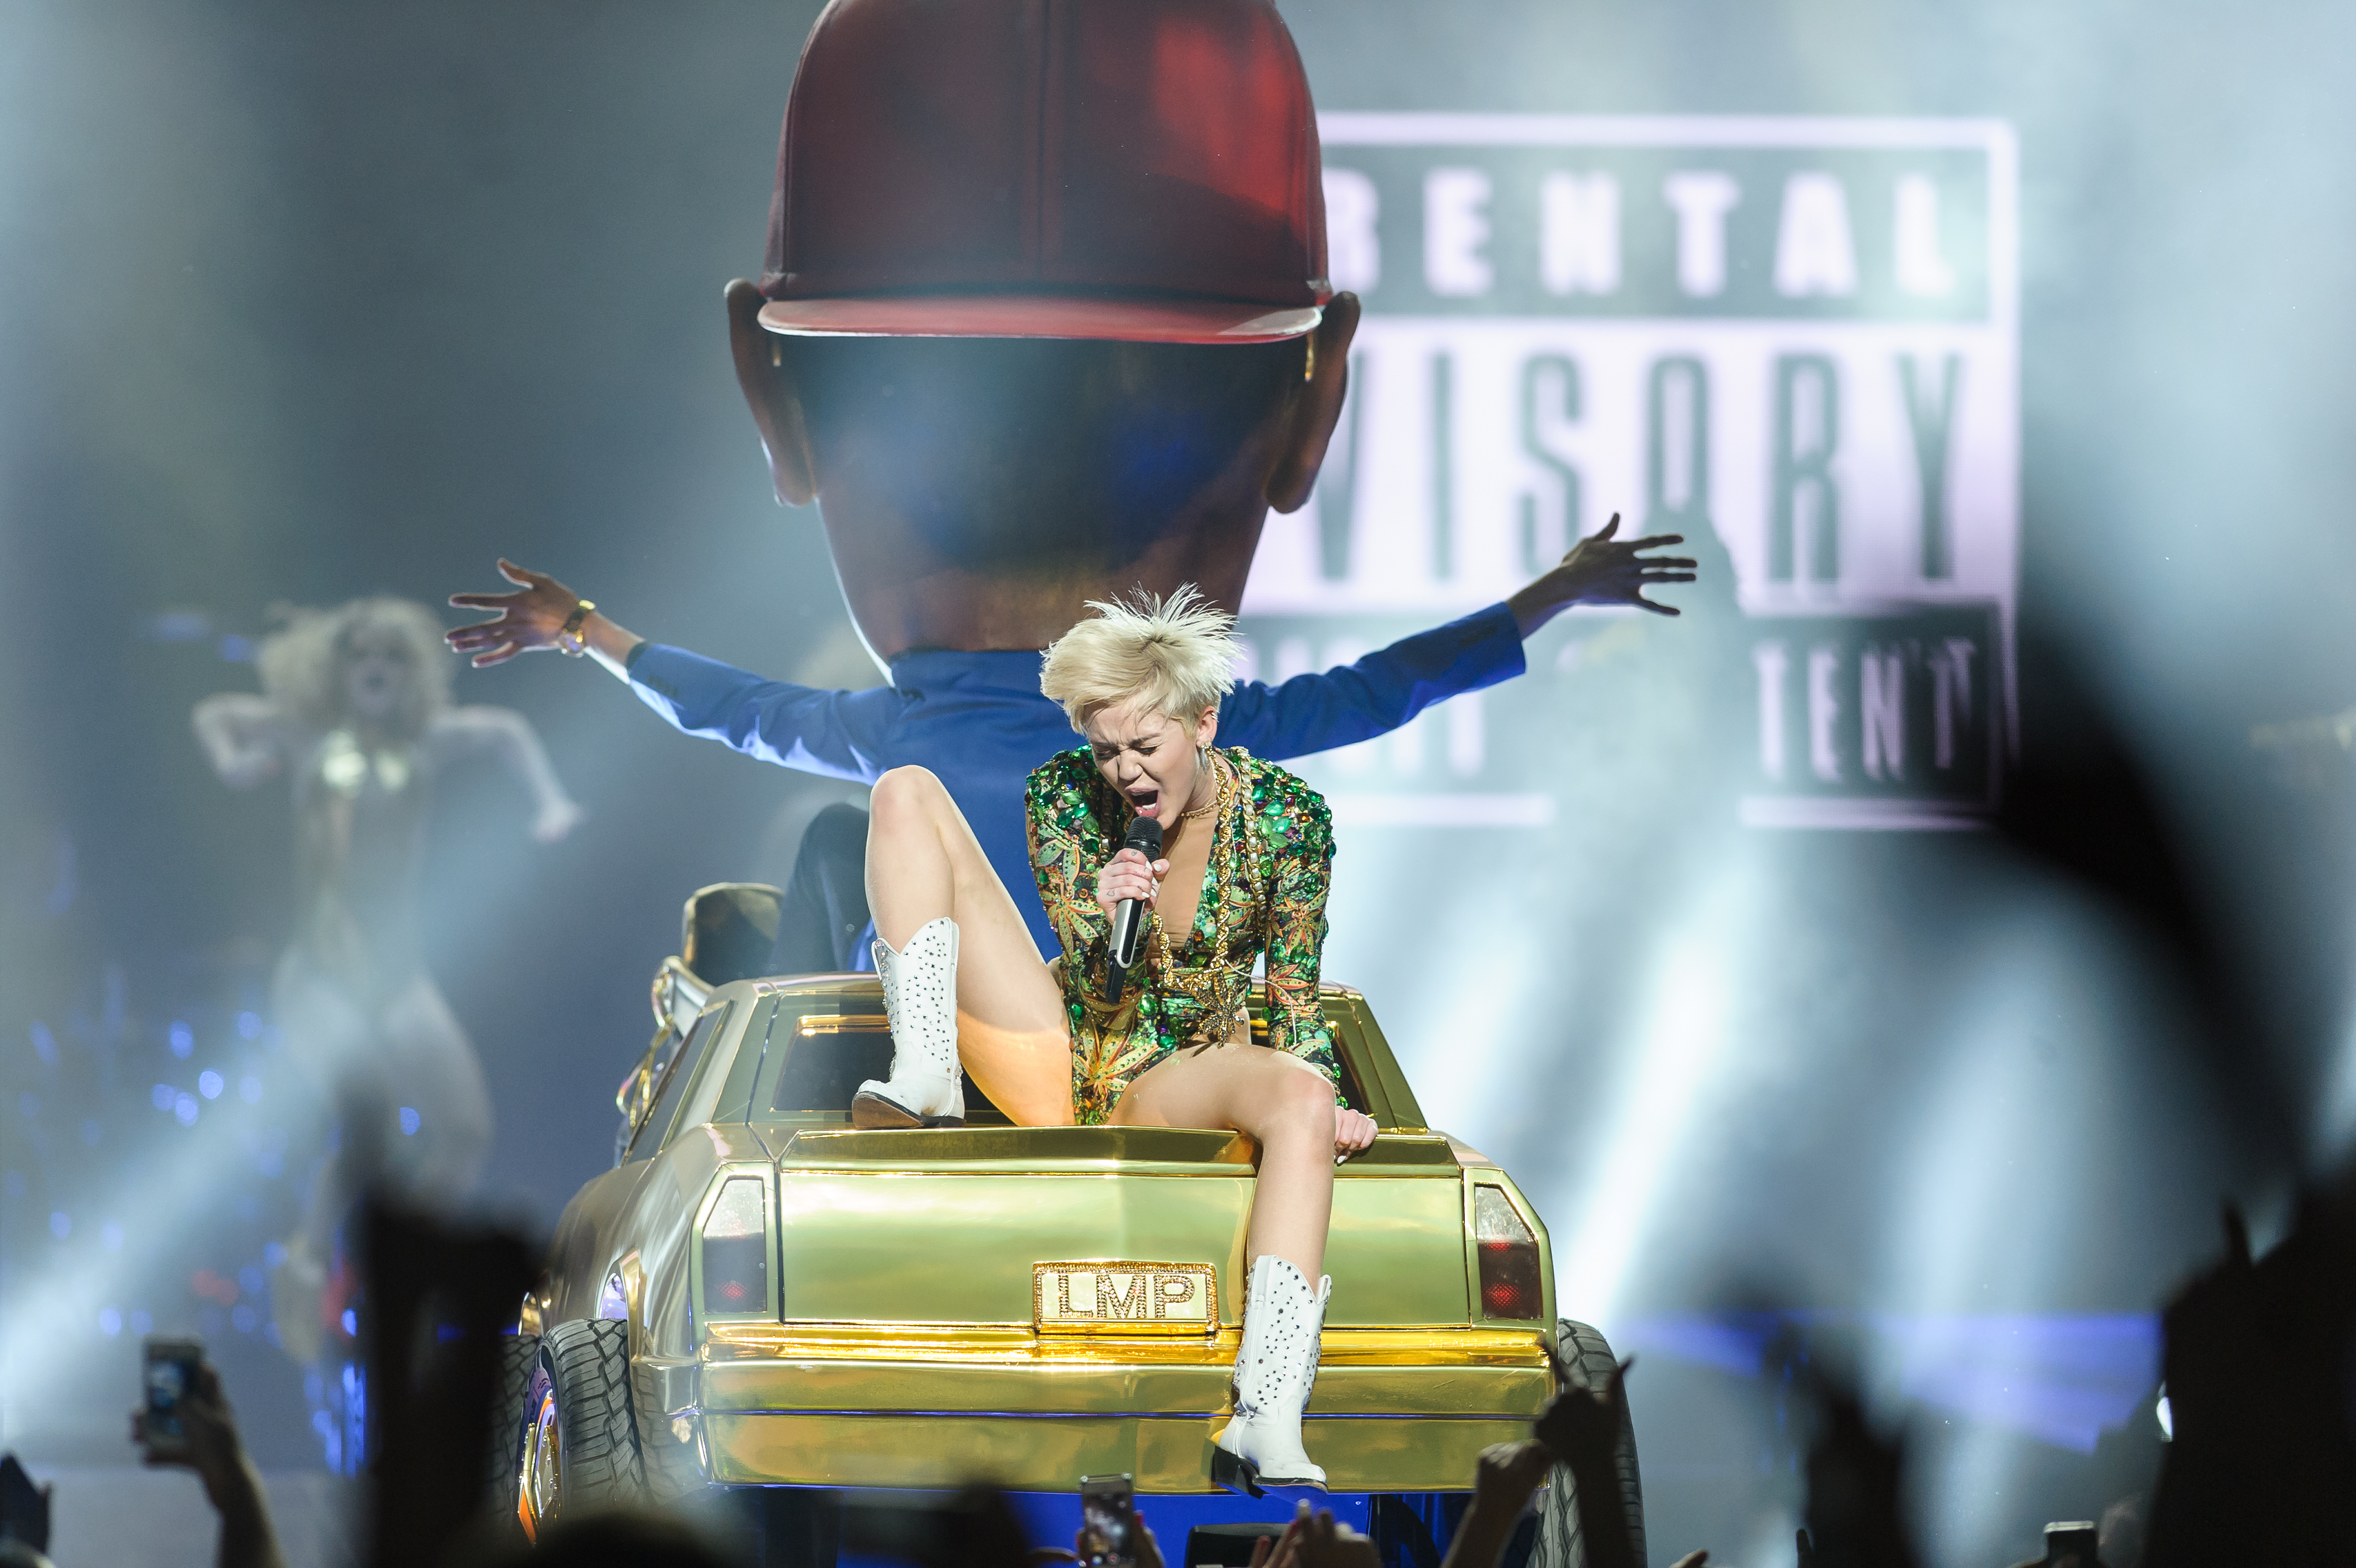 miley singing in the back of a car on stage